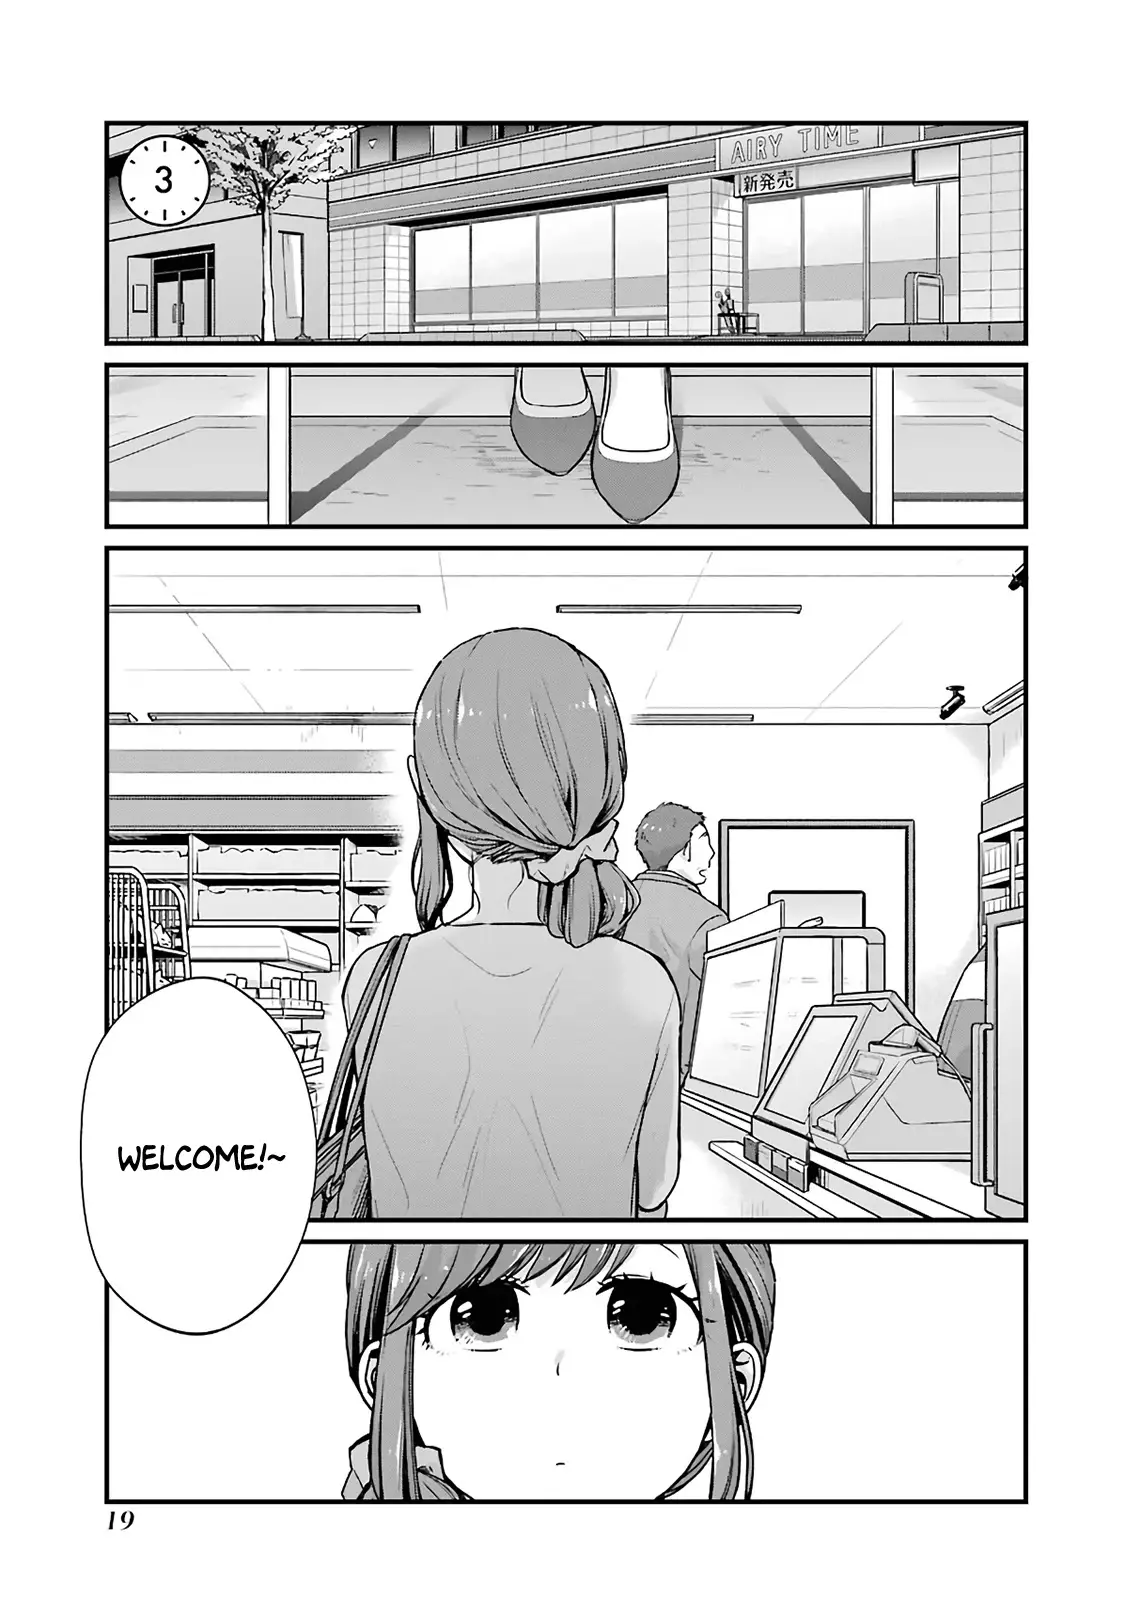 5 Minutes With You At A Convenience Store - 3 page 1